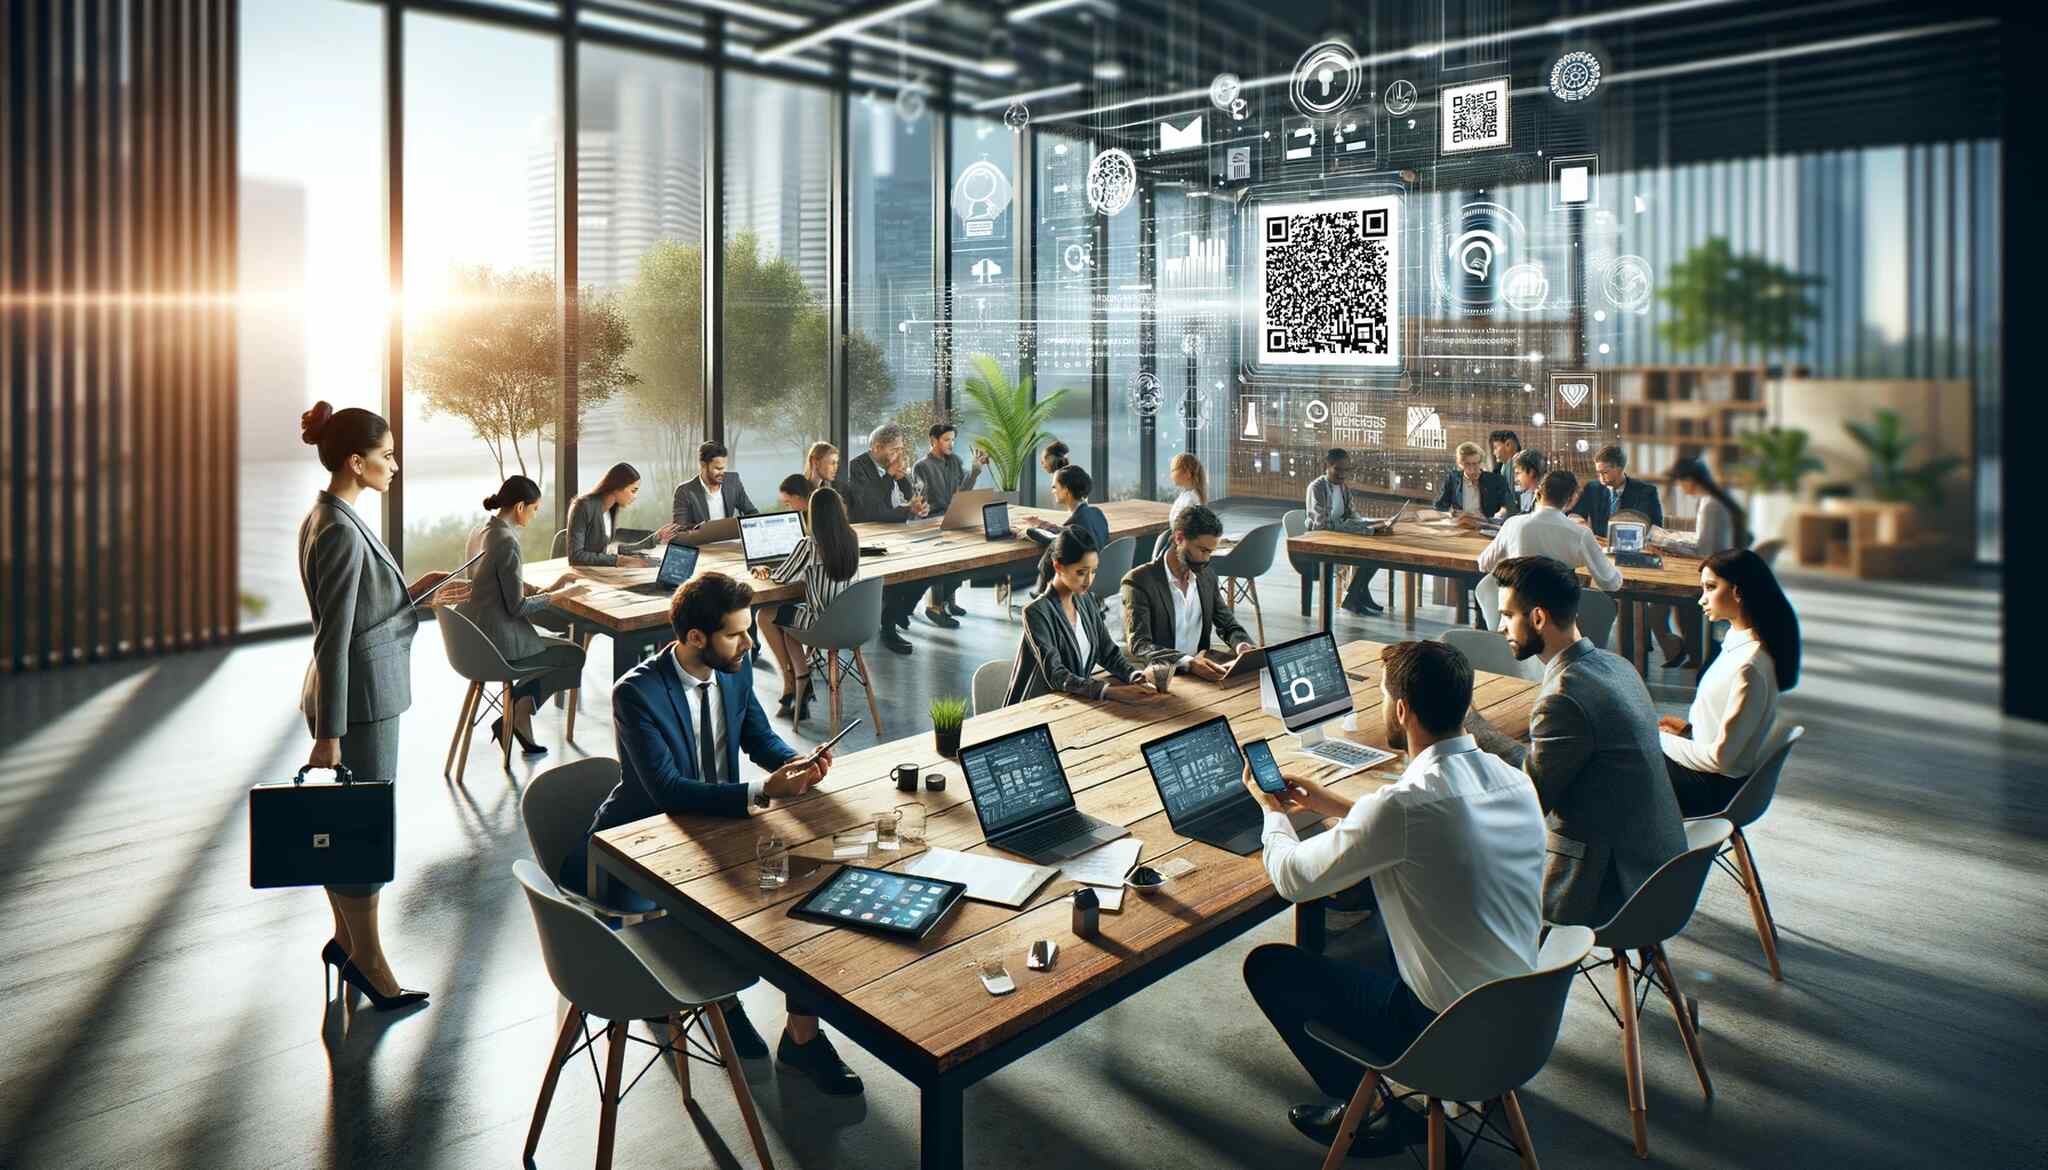 people working at an office and a big screen displaying QR codes